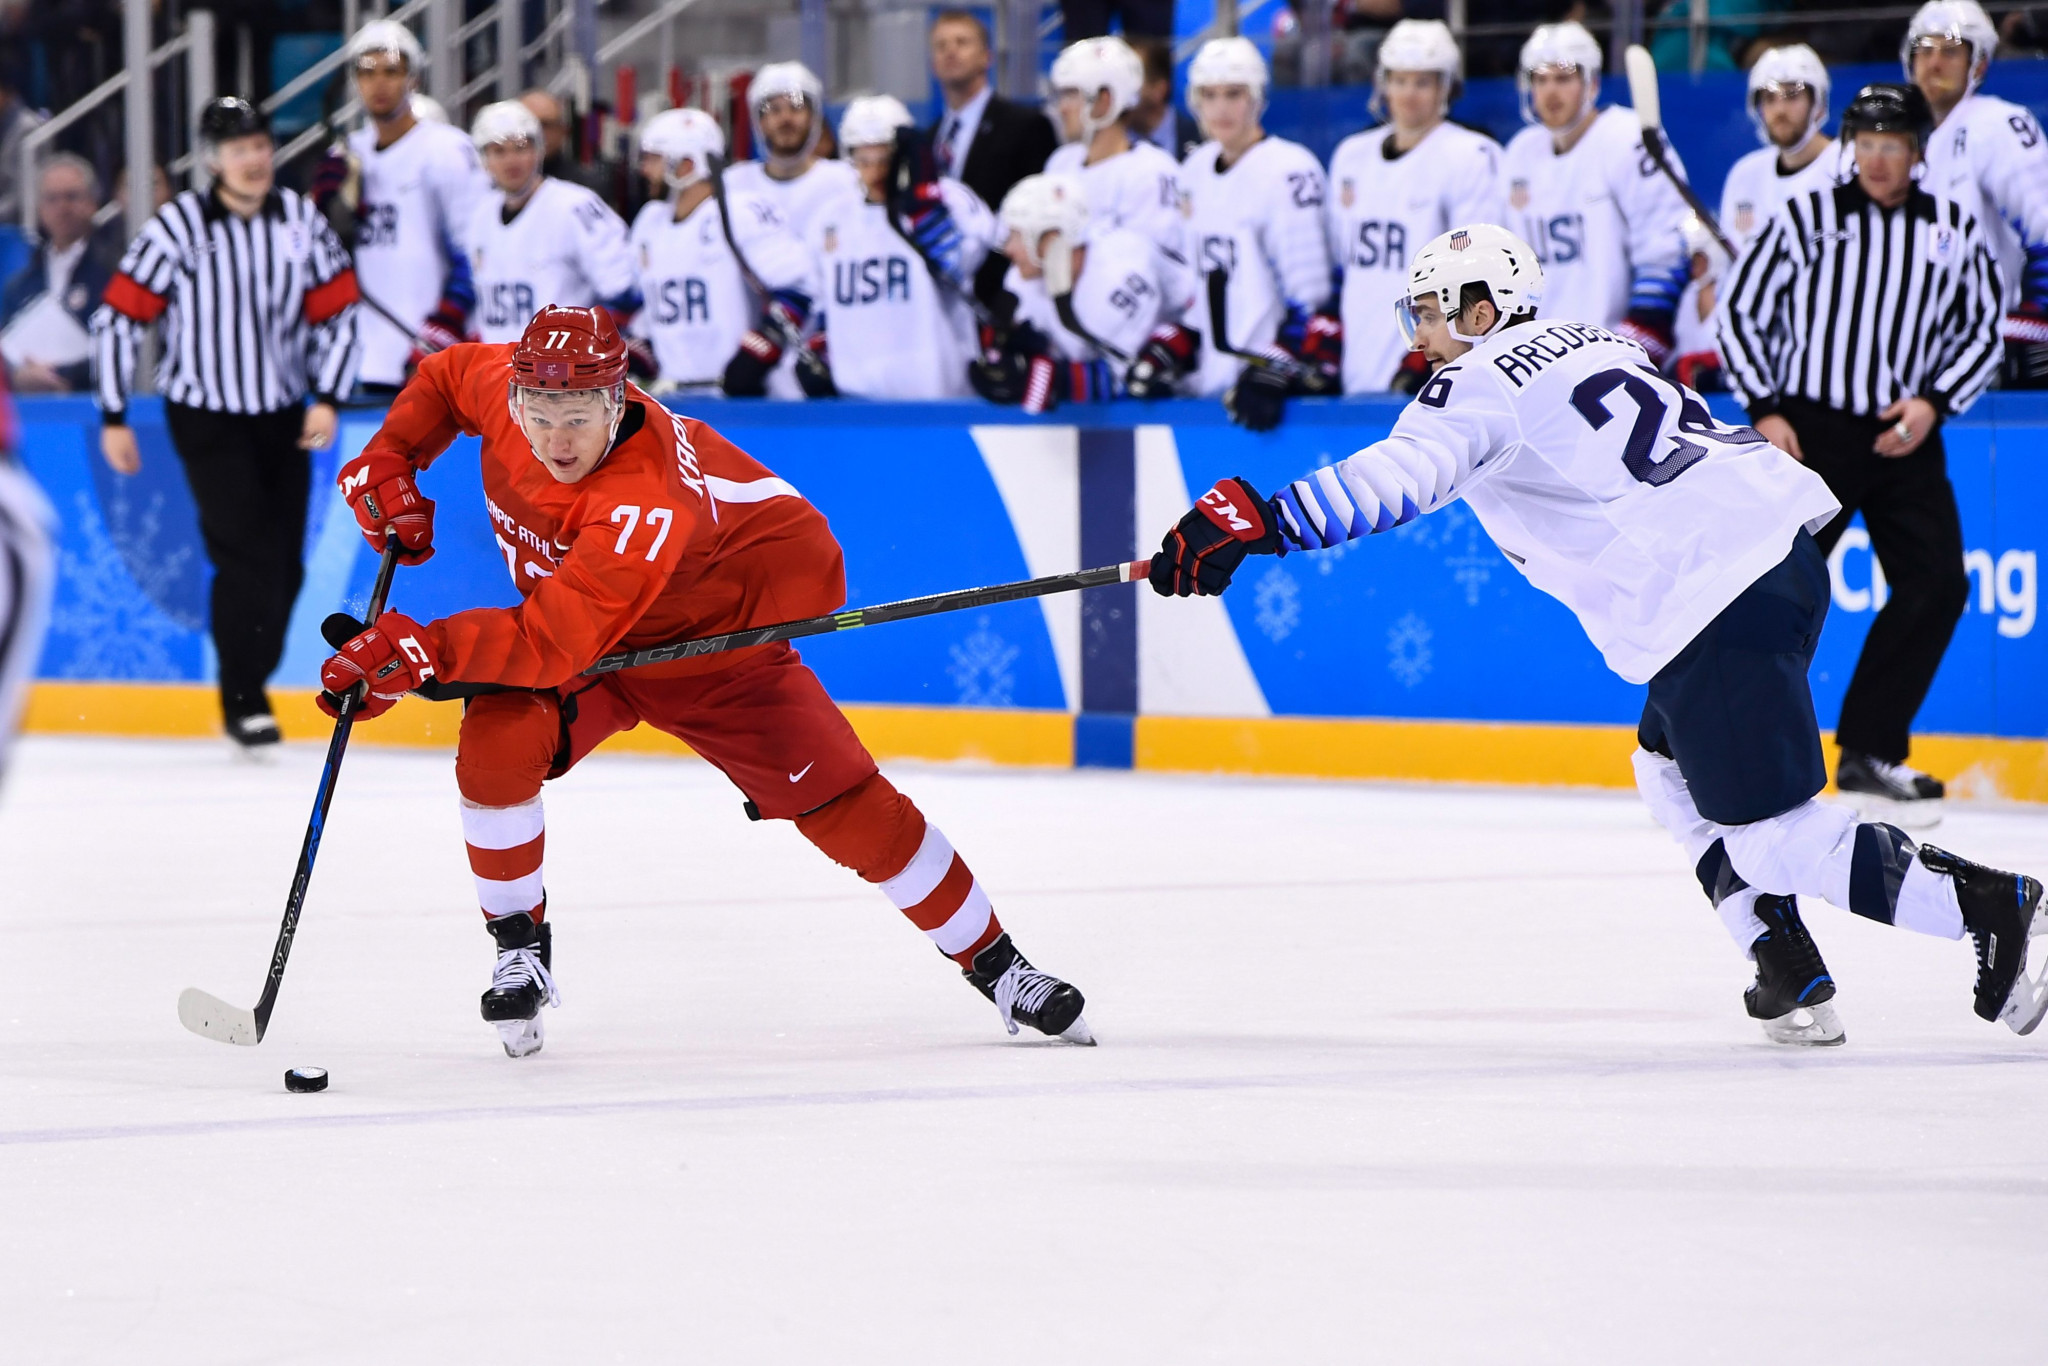 The Olympic Athletes from Russia thrashed United States today in ice hockey ©Getty Images